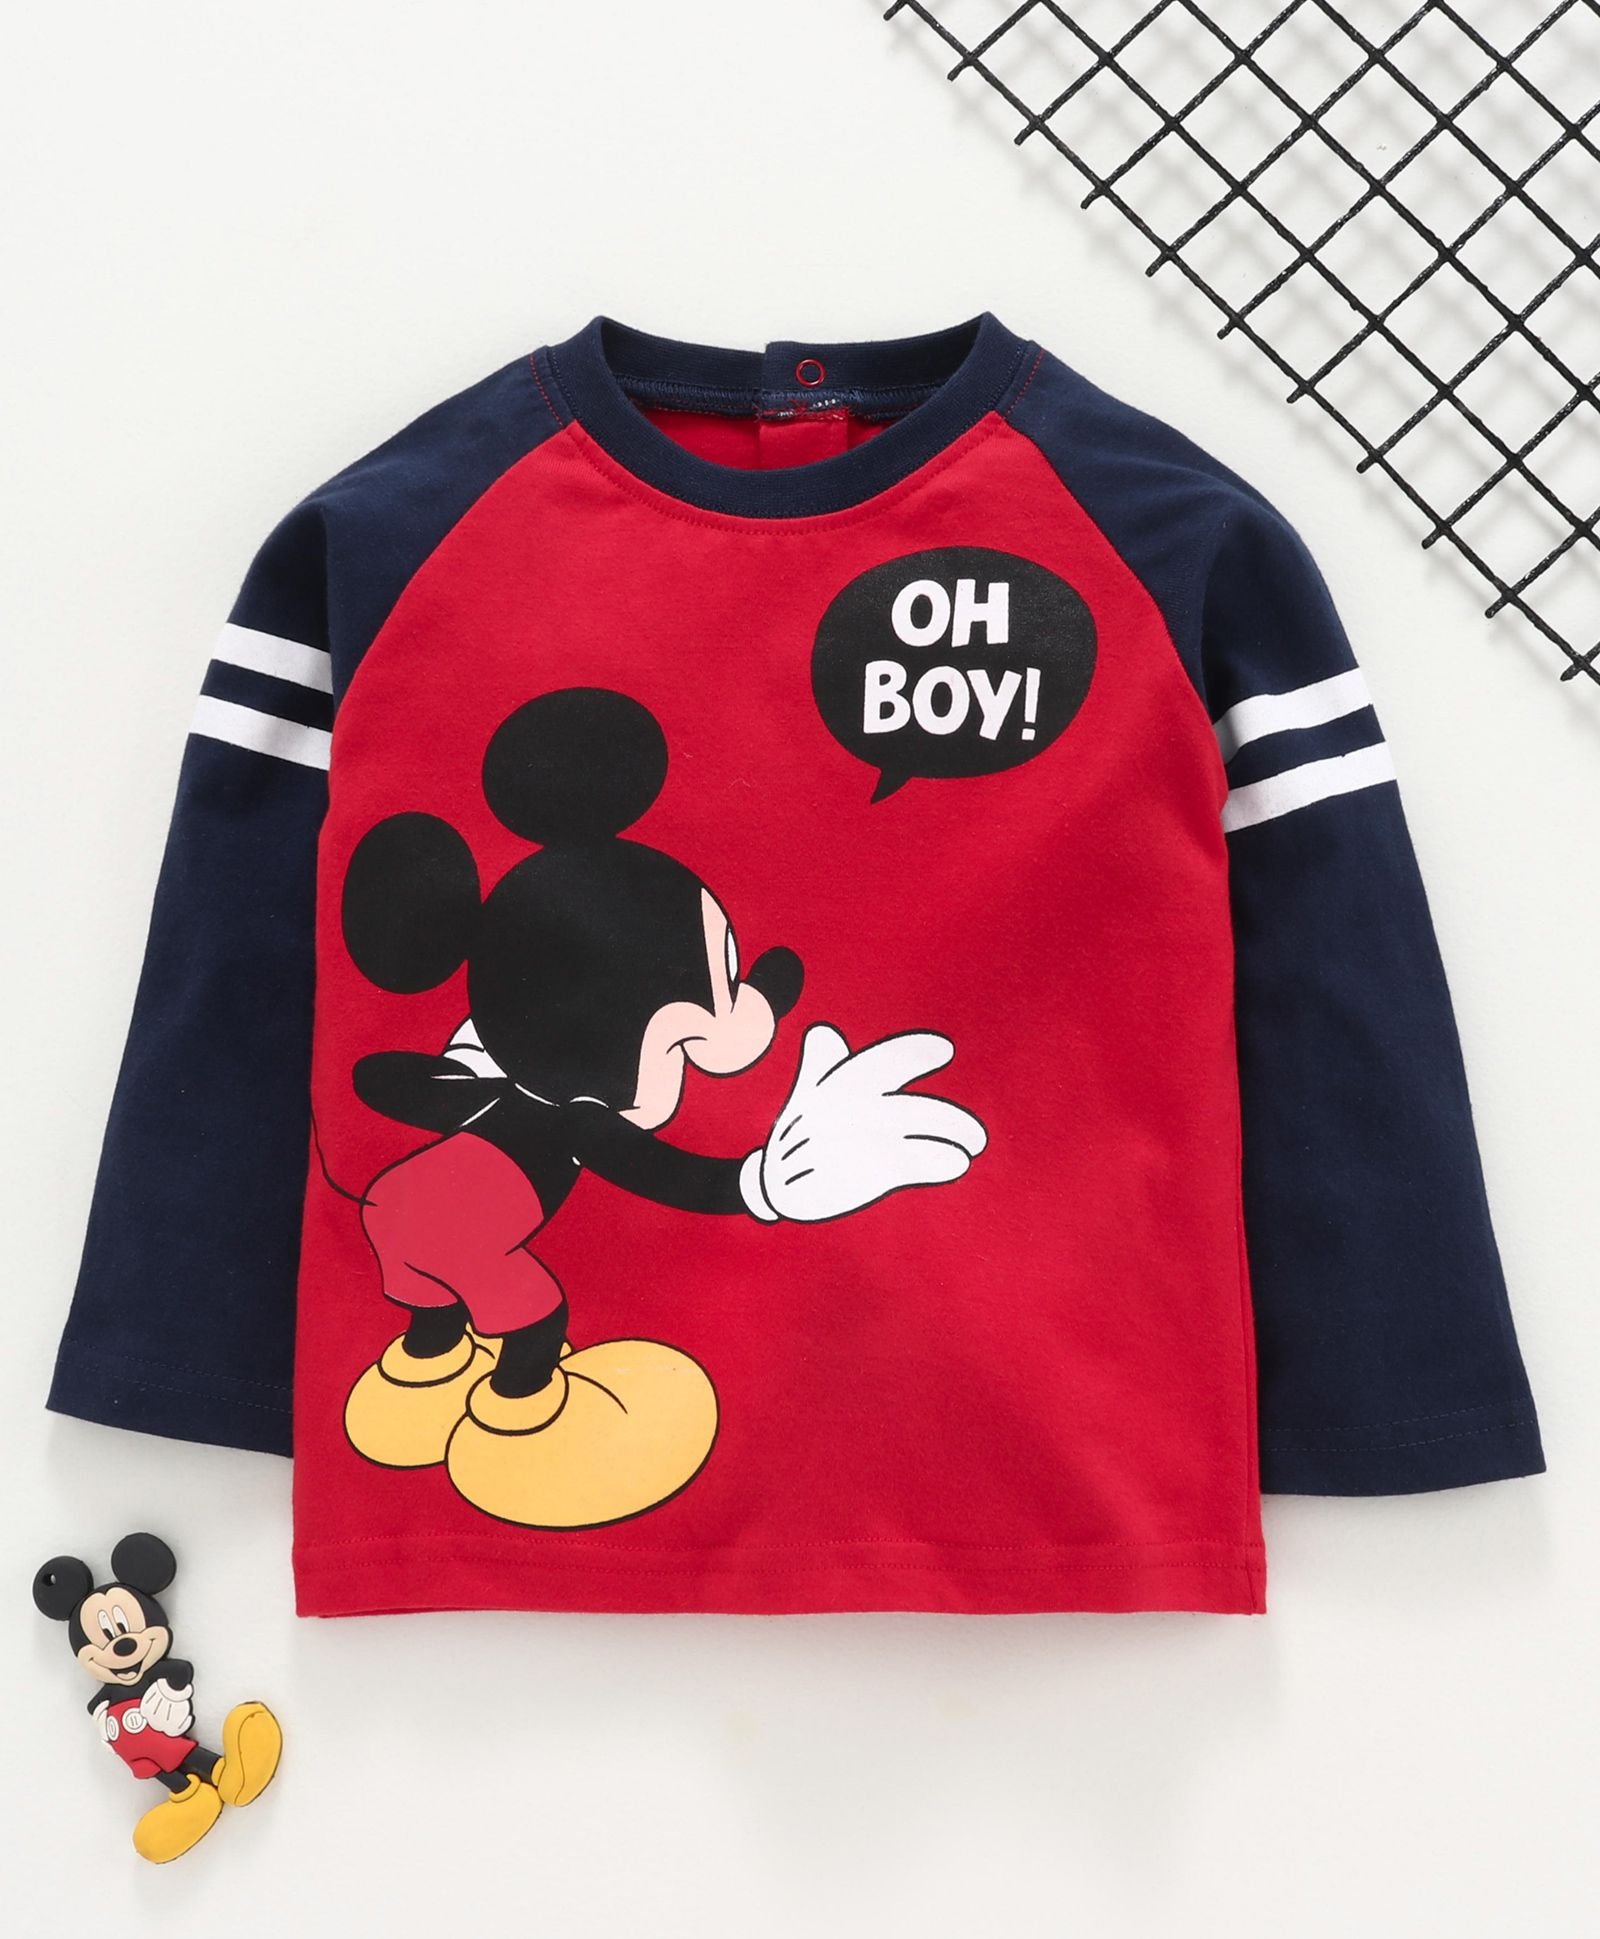 Mickey Mouse birthday shirt Mickey Mouse baby boy Mickey Mouse outfit Kleding Unisex kinderkleding Tops & T-shirts T-shirts T-shirts met print Mickey Mouse smash cake outfit Mickey Mouse 1st birthday boy 